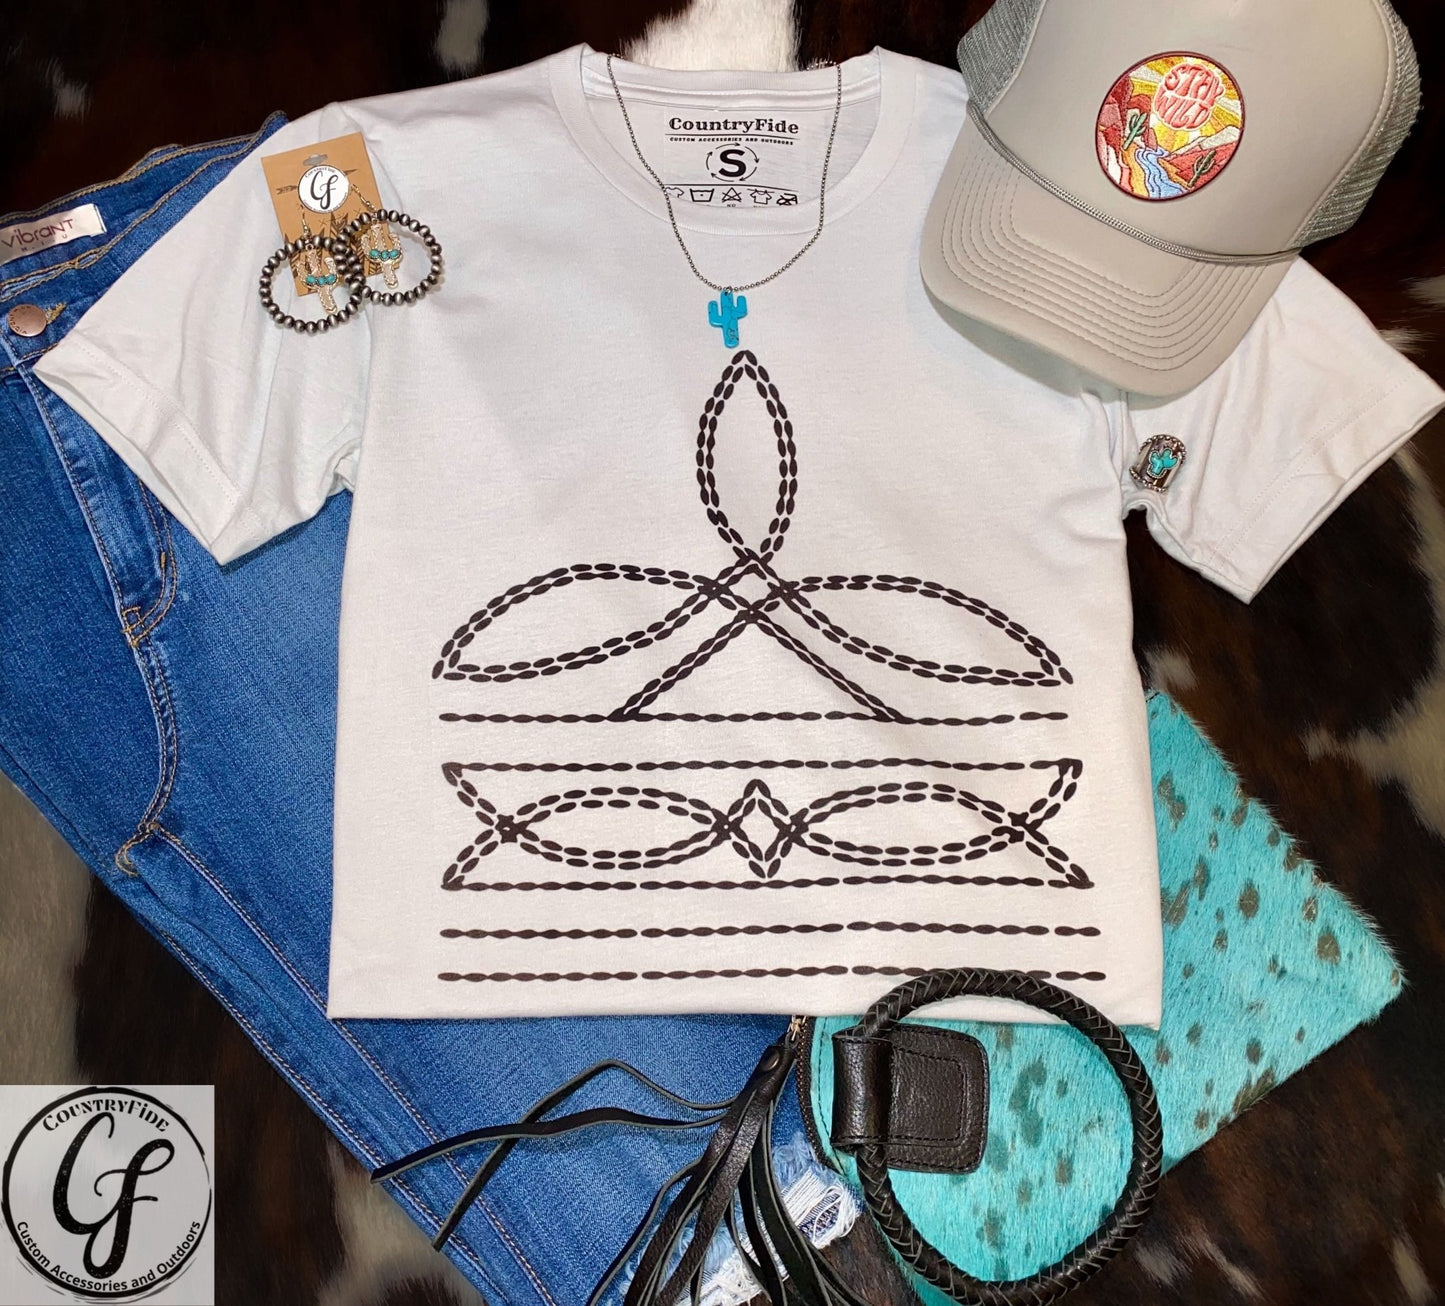 COWBOY BOOT STITCH TEE - CountryFide Custom Accessories and Outdoors